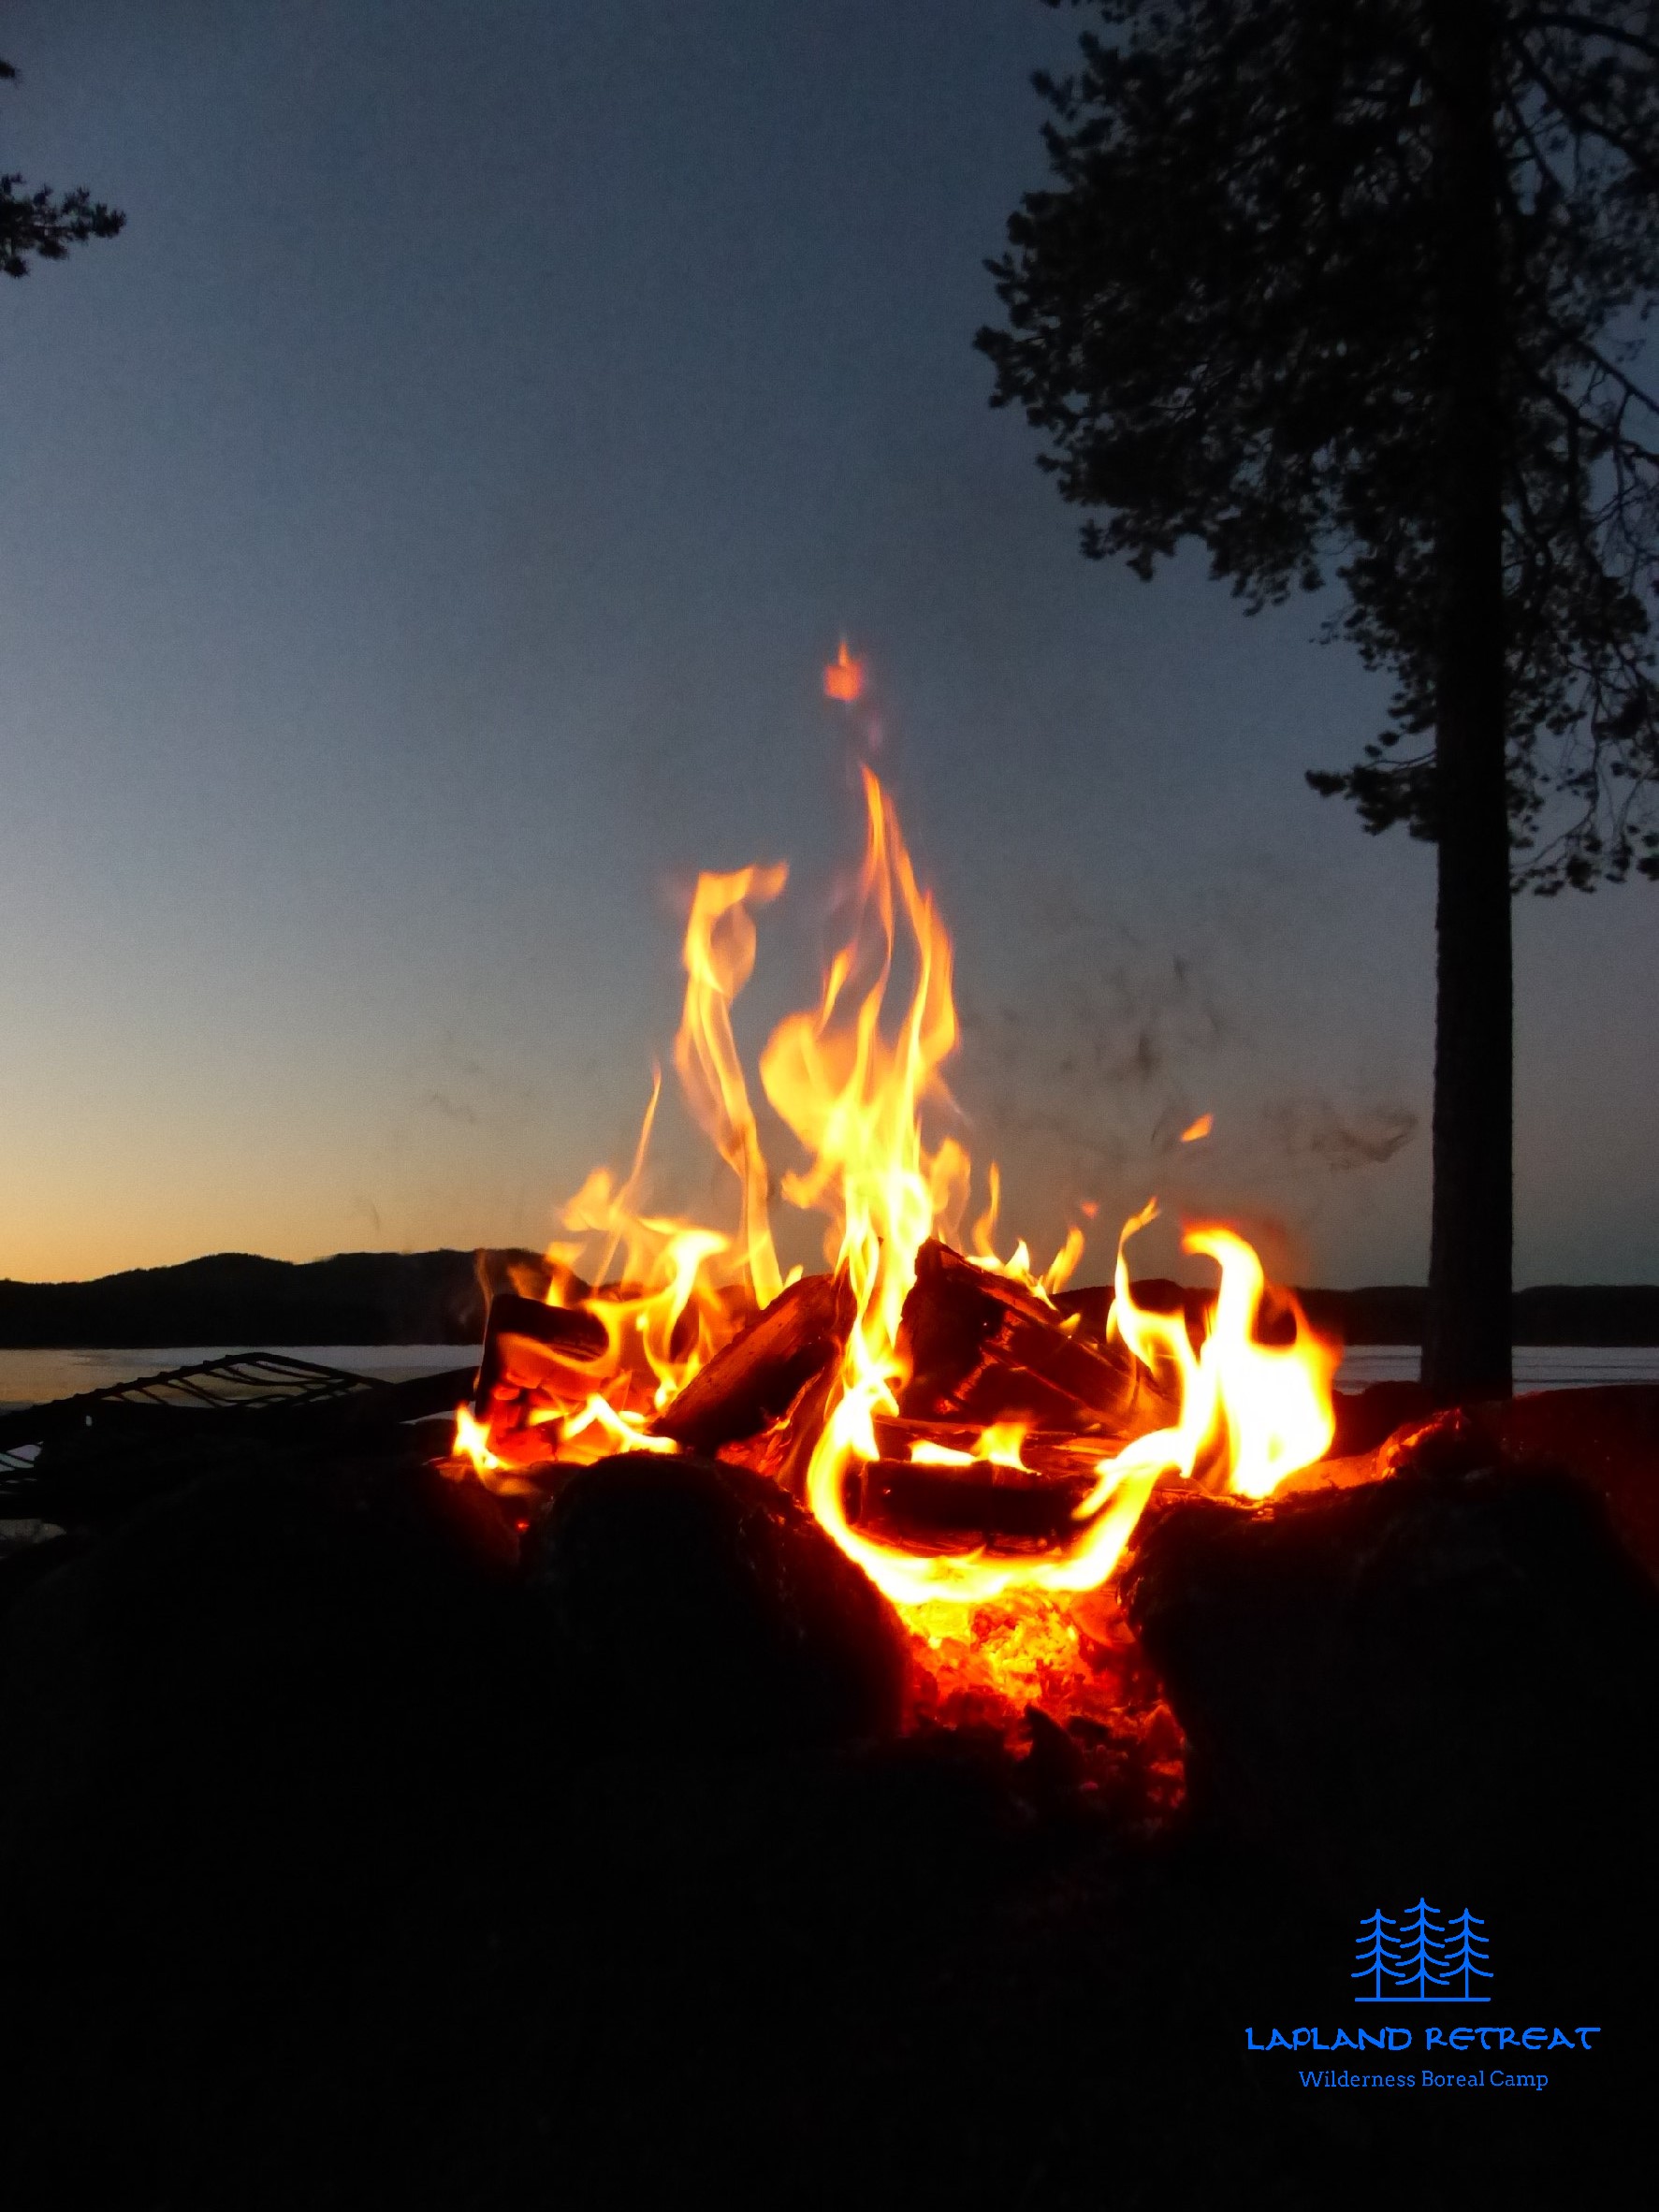 Fire by the lake